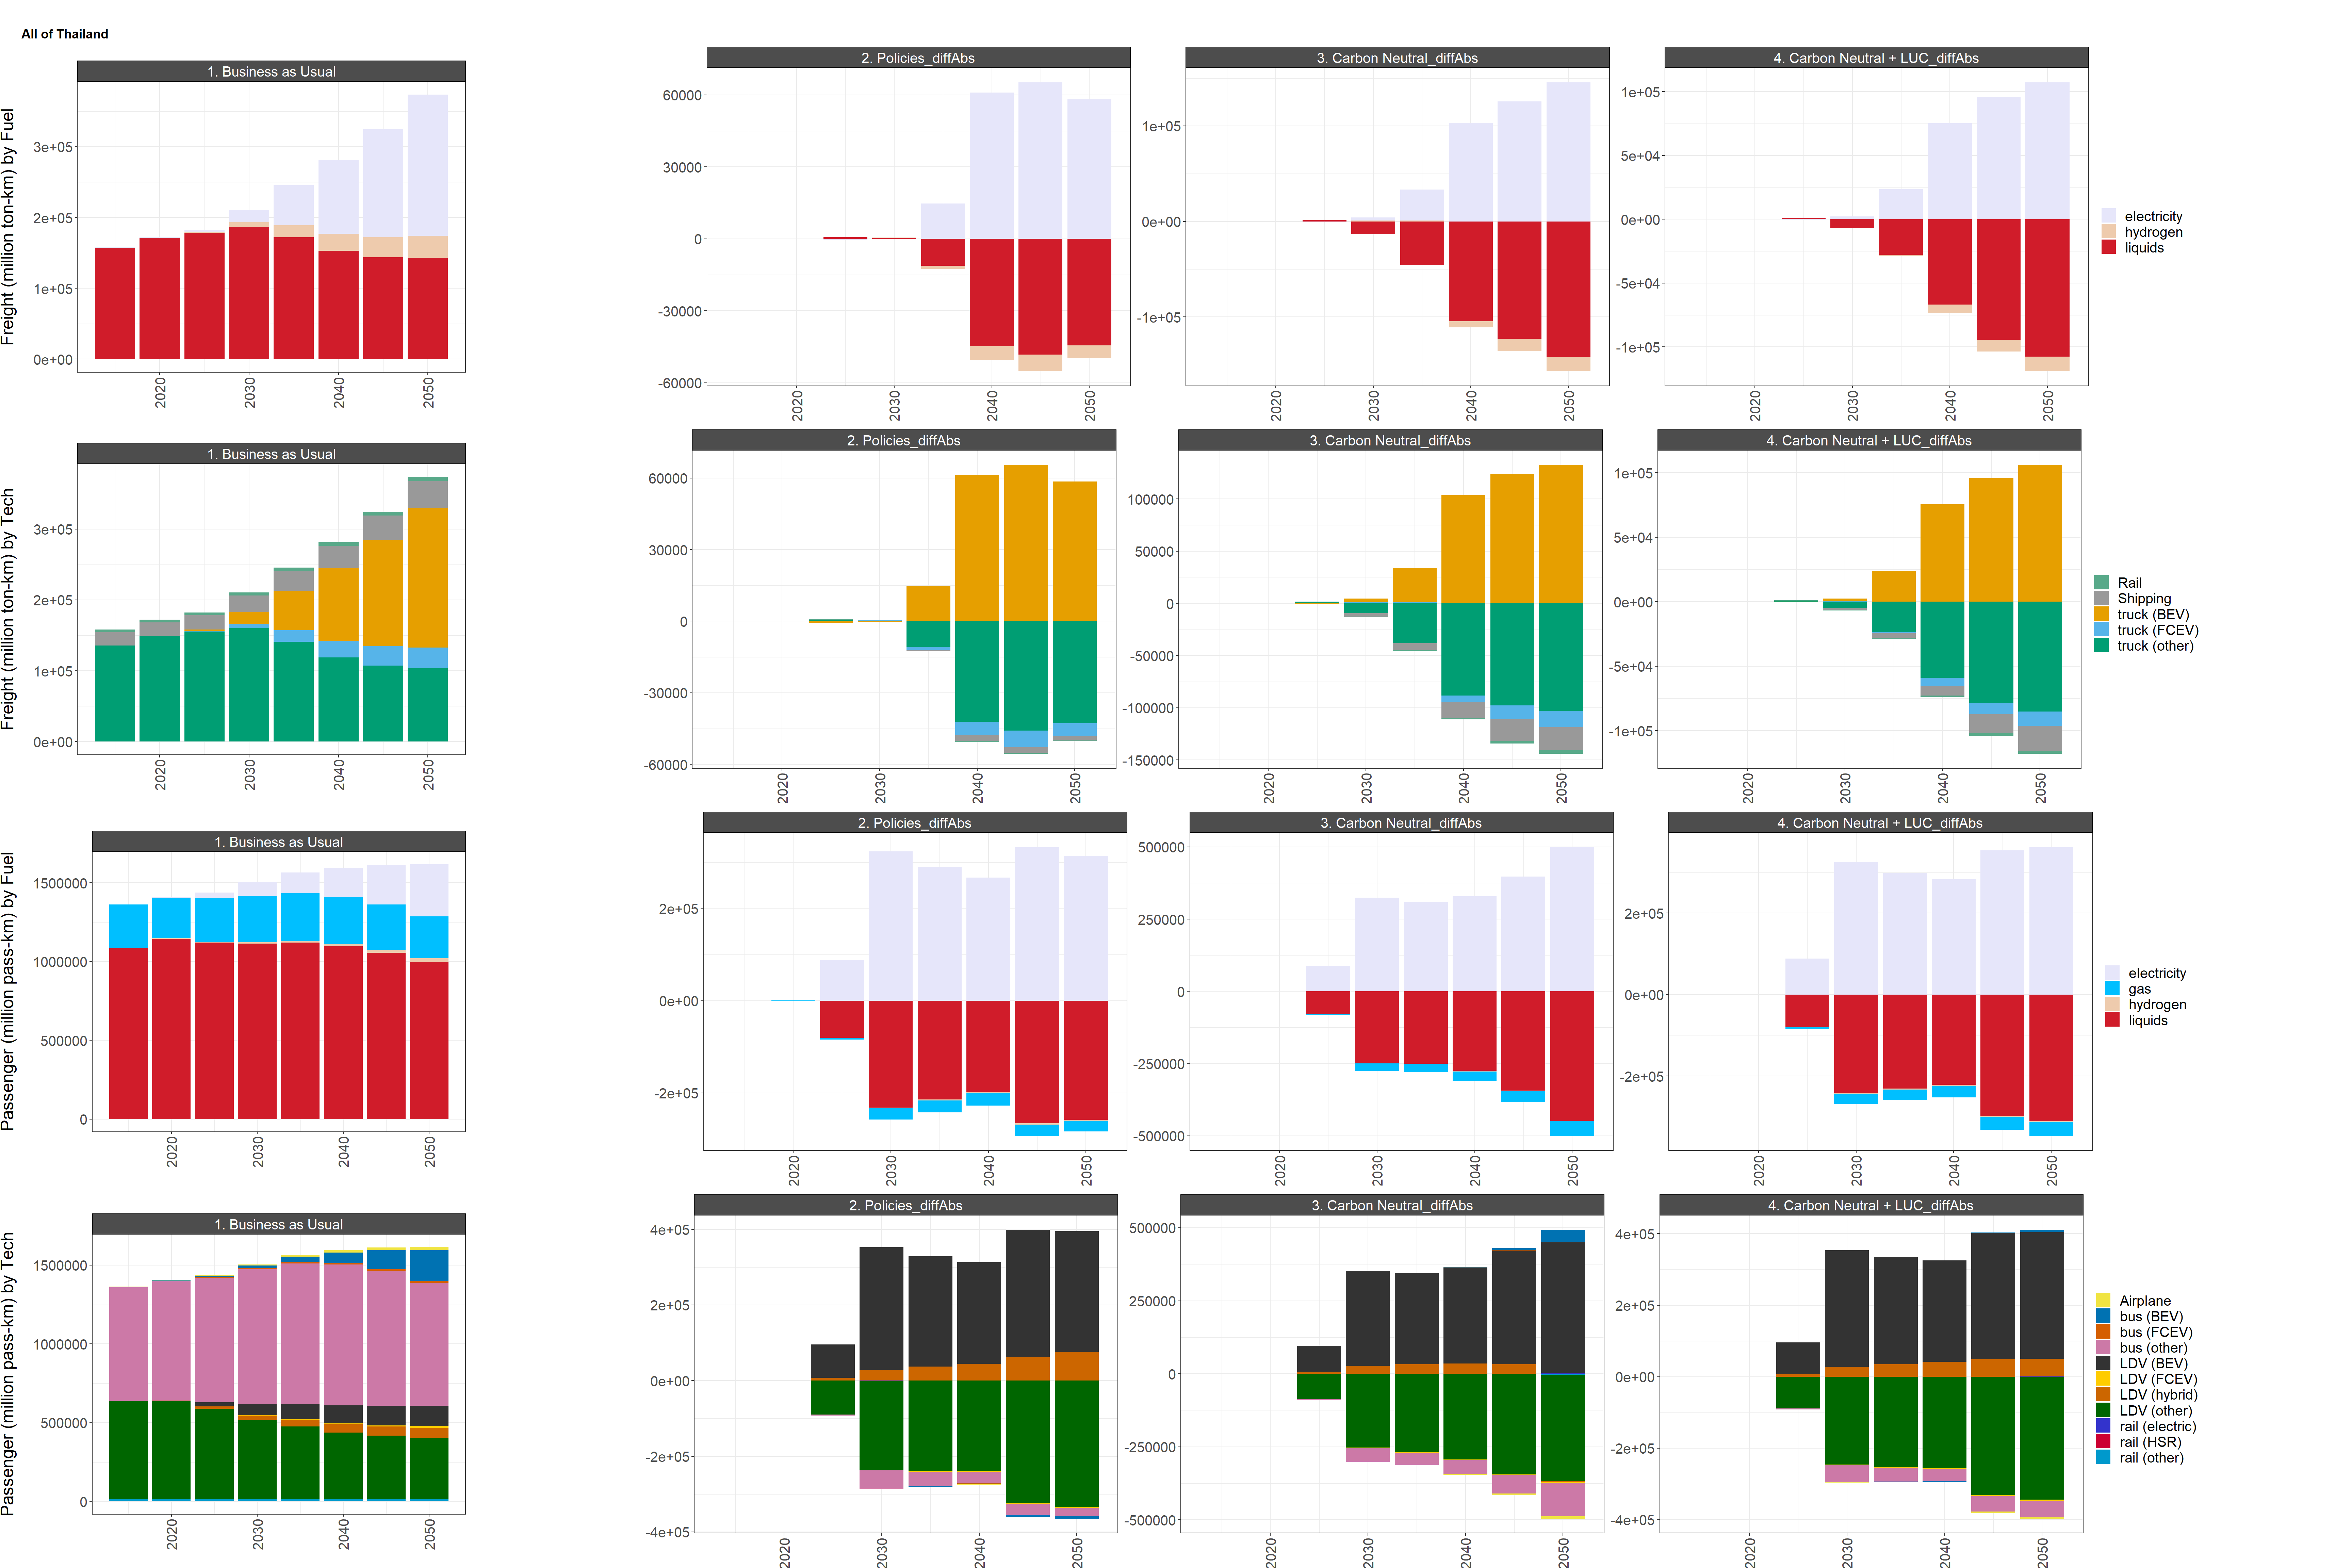 Difference in national transportation GHG emissions by mode and service output by mode and fuel between the reference scenario (left) and the low and high policy scenarios (right)